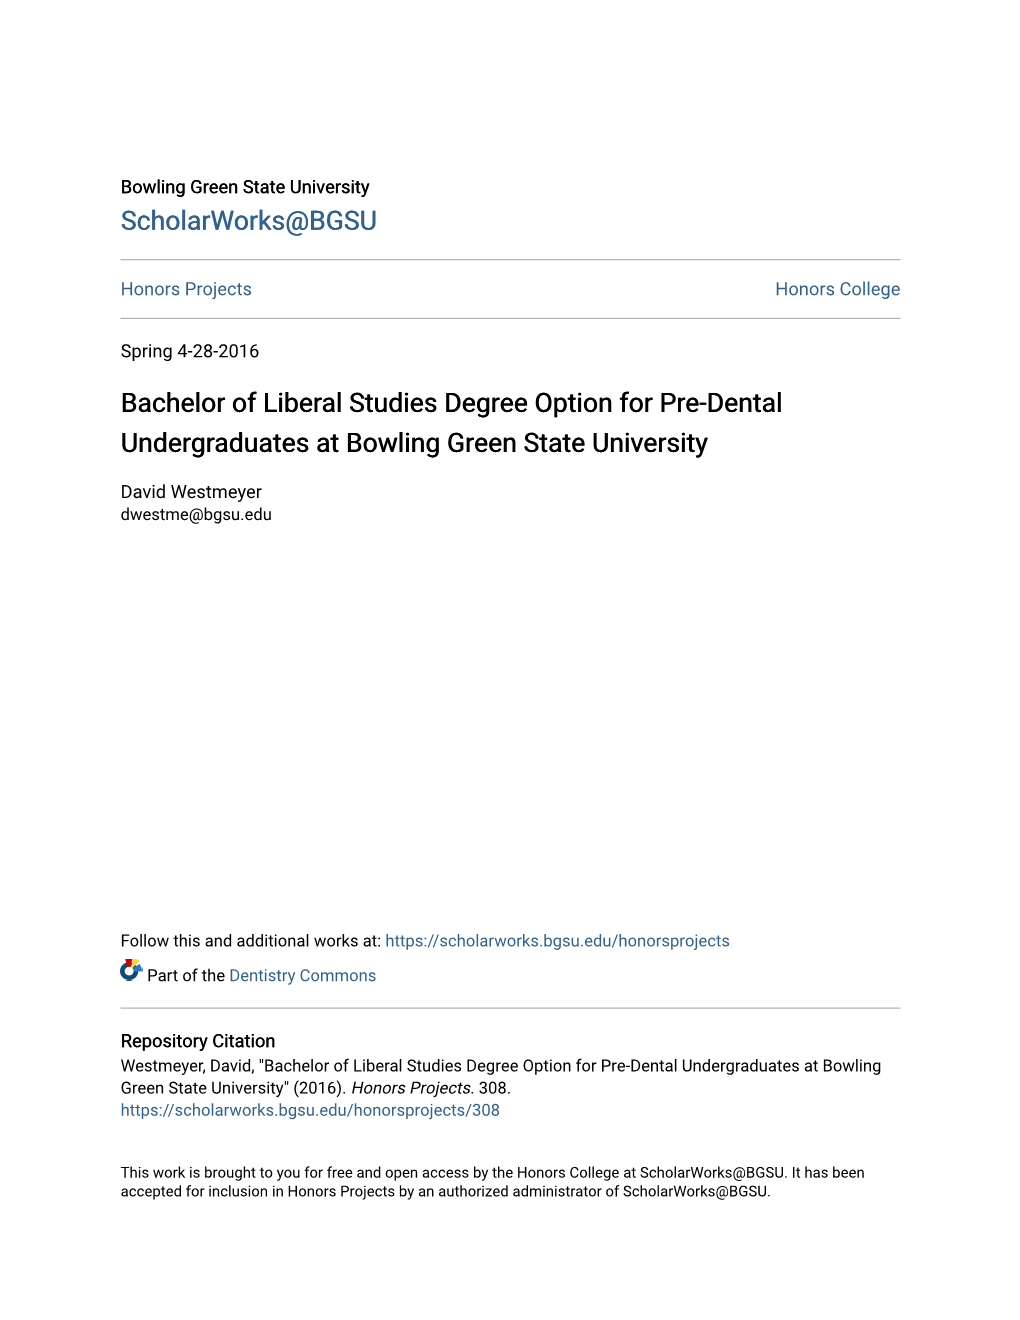 Bachelor of Liberal Studies Degree Option for Pre-Dental Undergraduates at Bowling Green State University